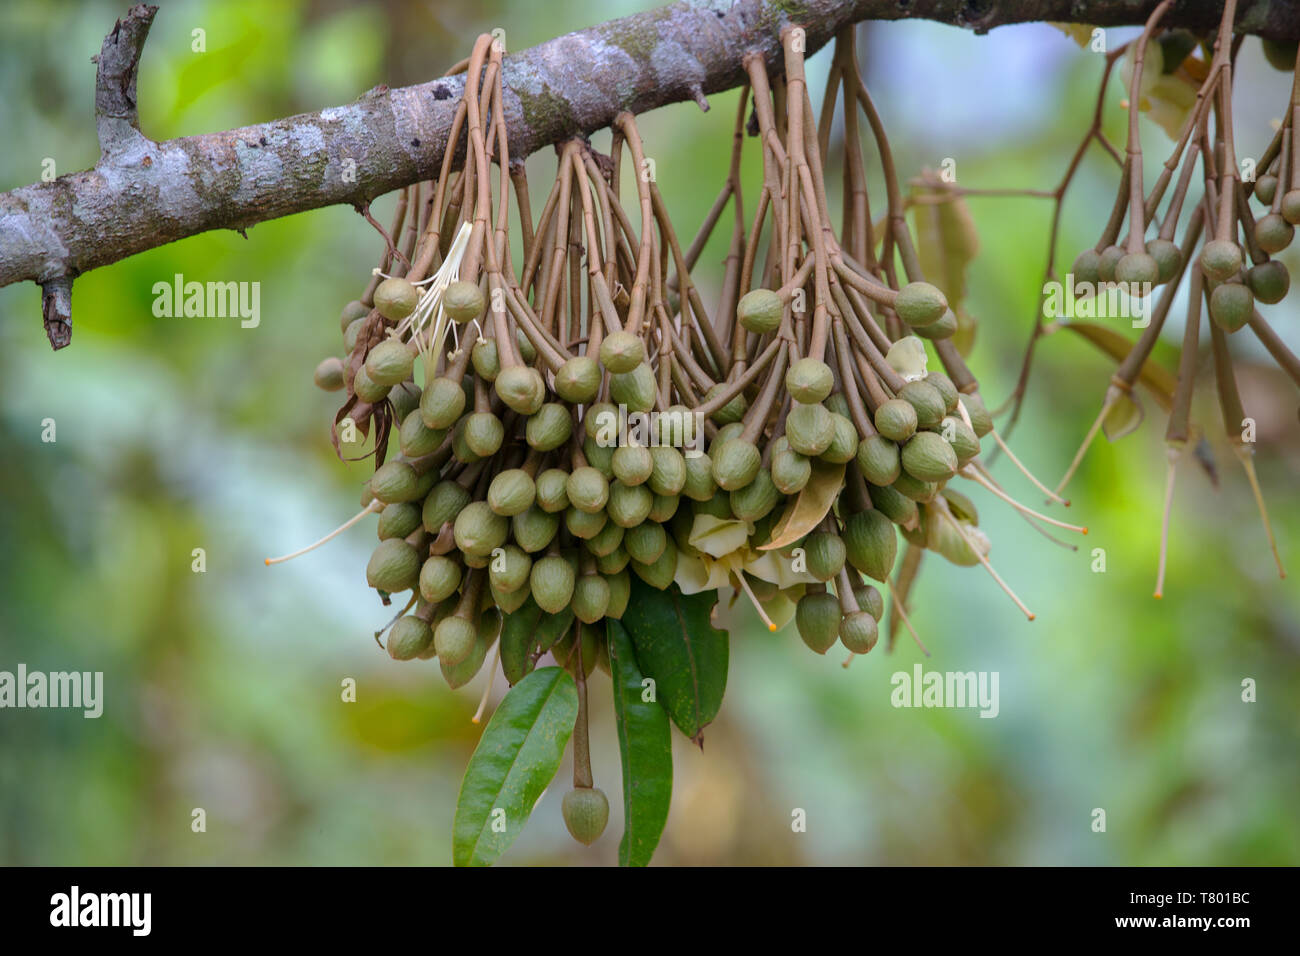 Young durian fruit emerging from blossom on a durian tree in Sabah Malaysian Borneo Stock Photo